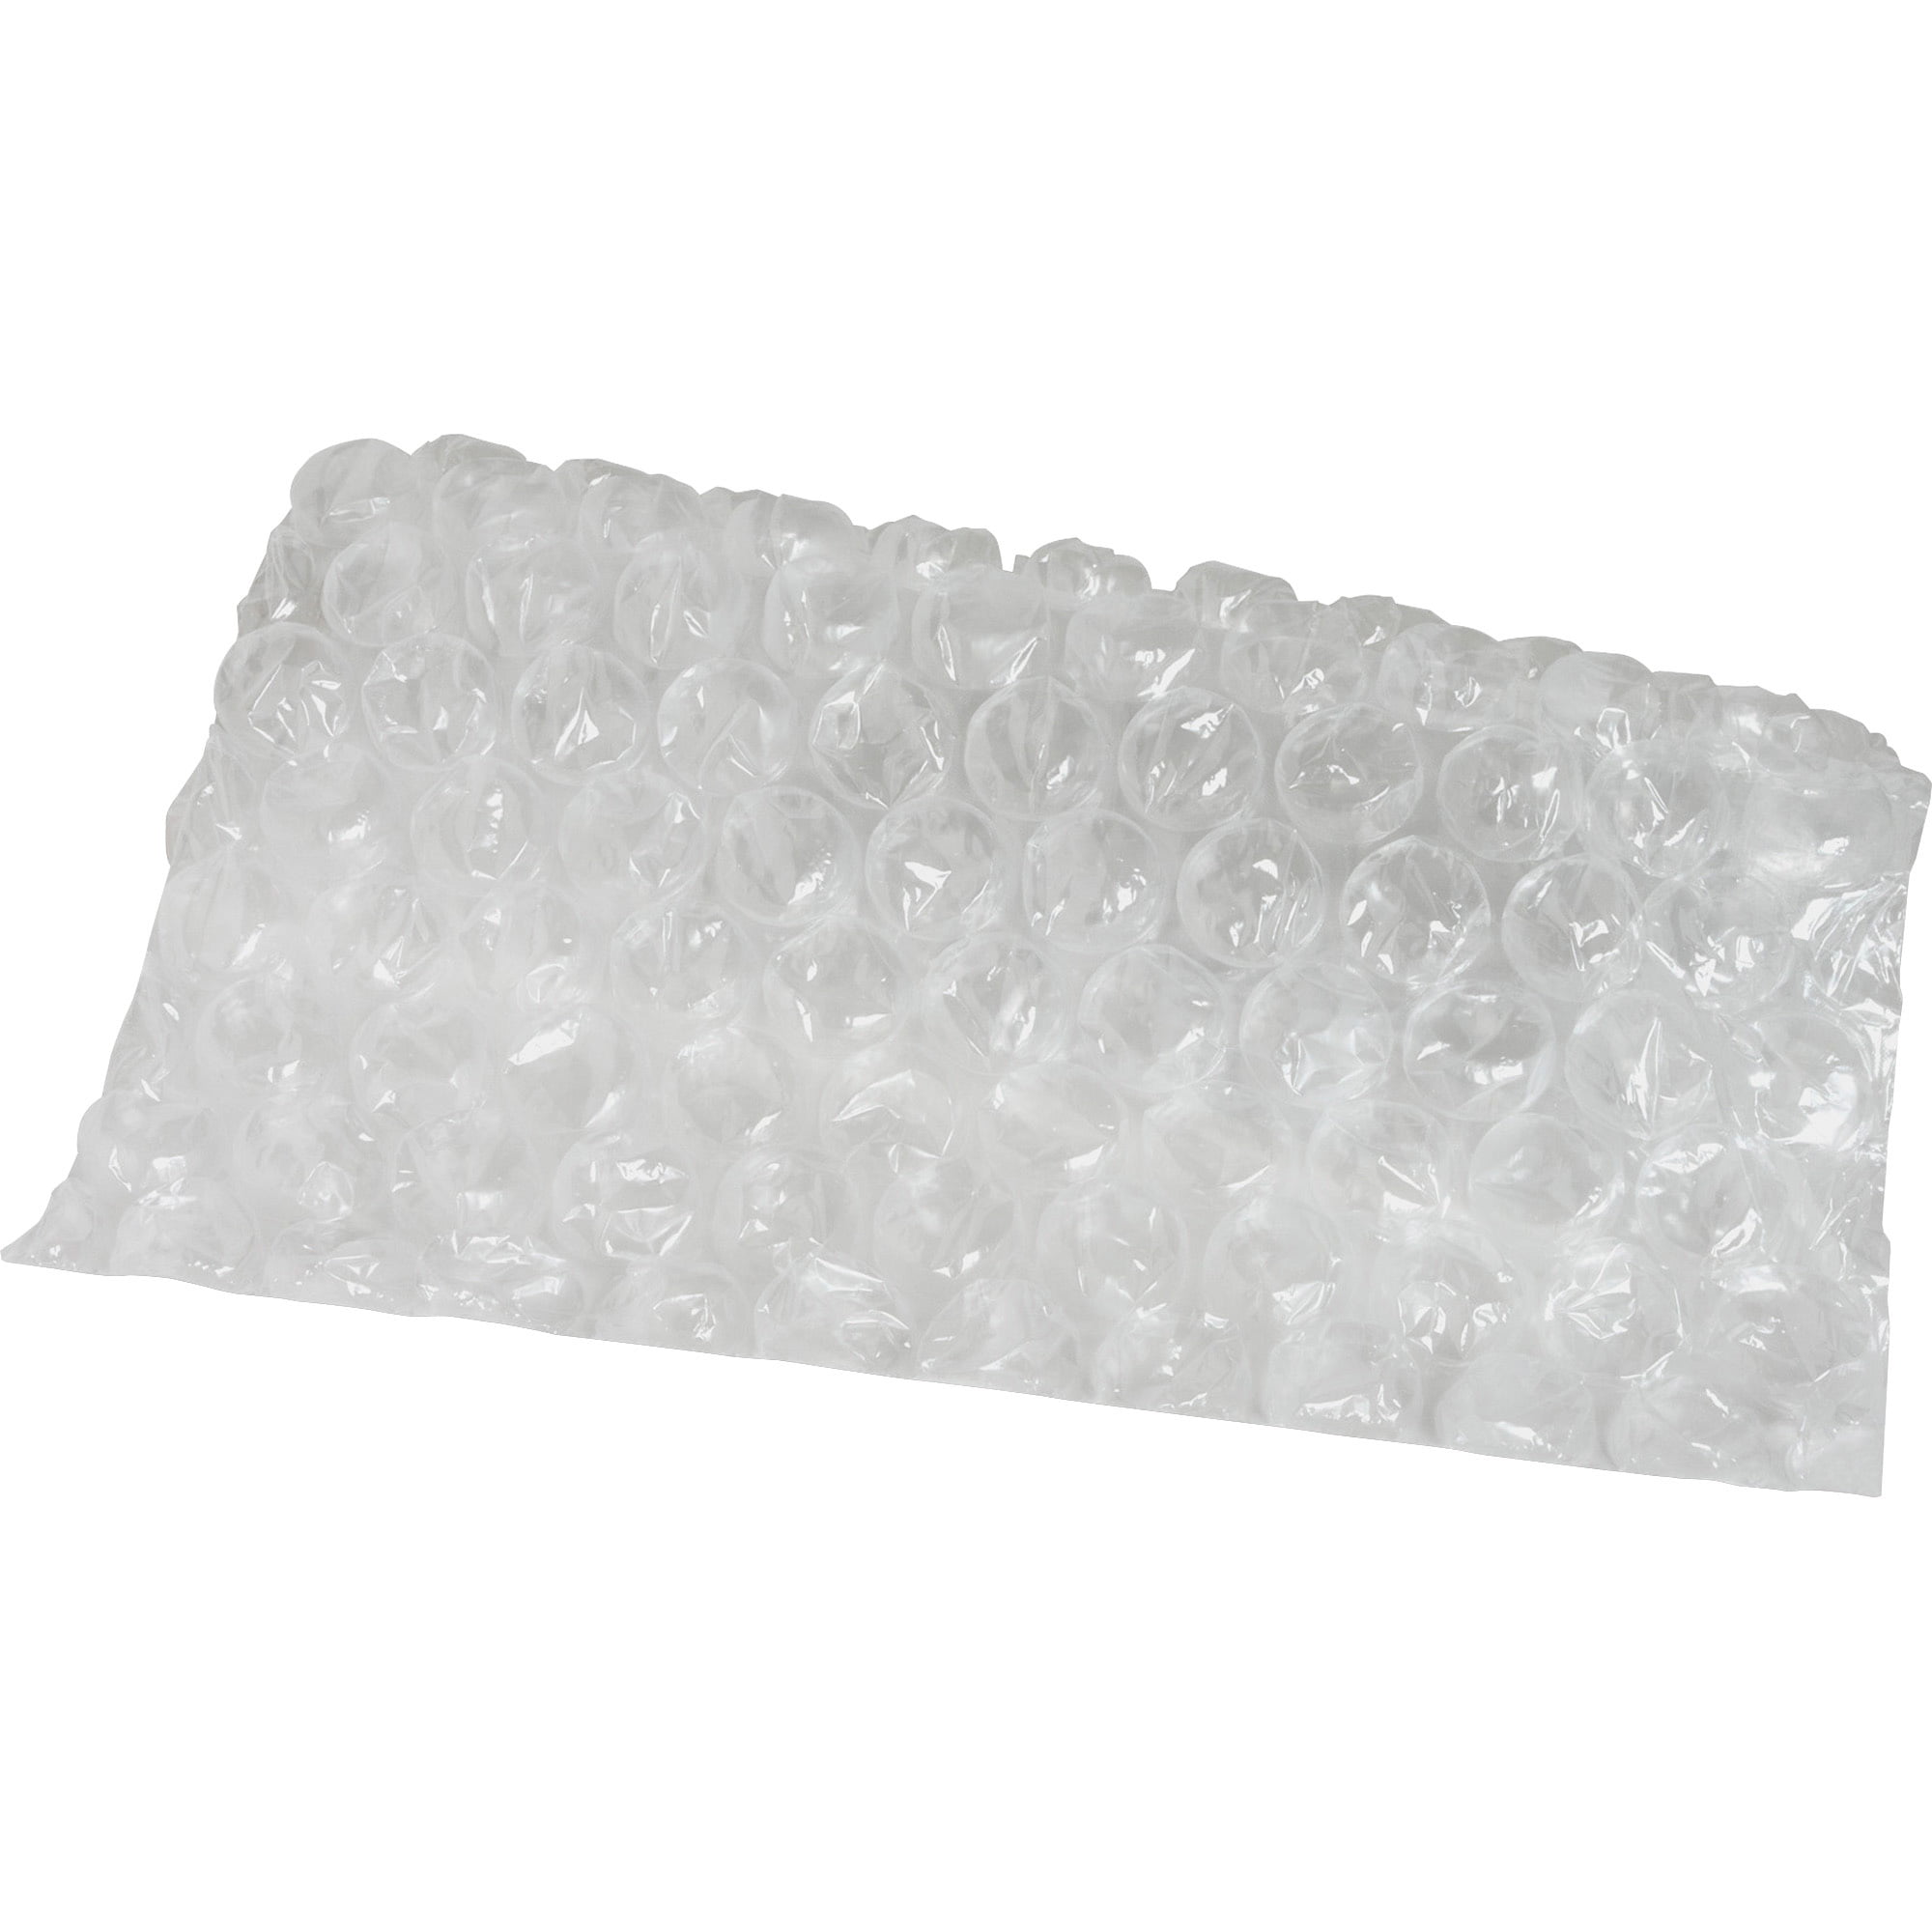 1 ROLL DOUBLE LENGTH SEALED AIR AIRCAP SMALL BUBBLE WRAP 500 mm X 200 m FREE 24H 